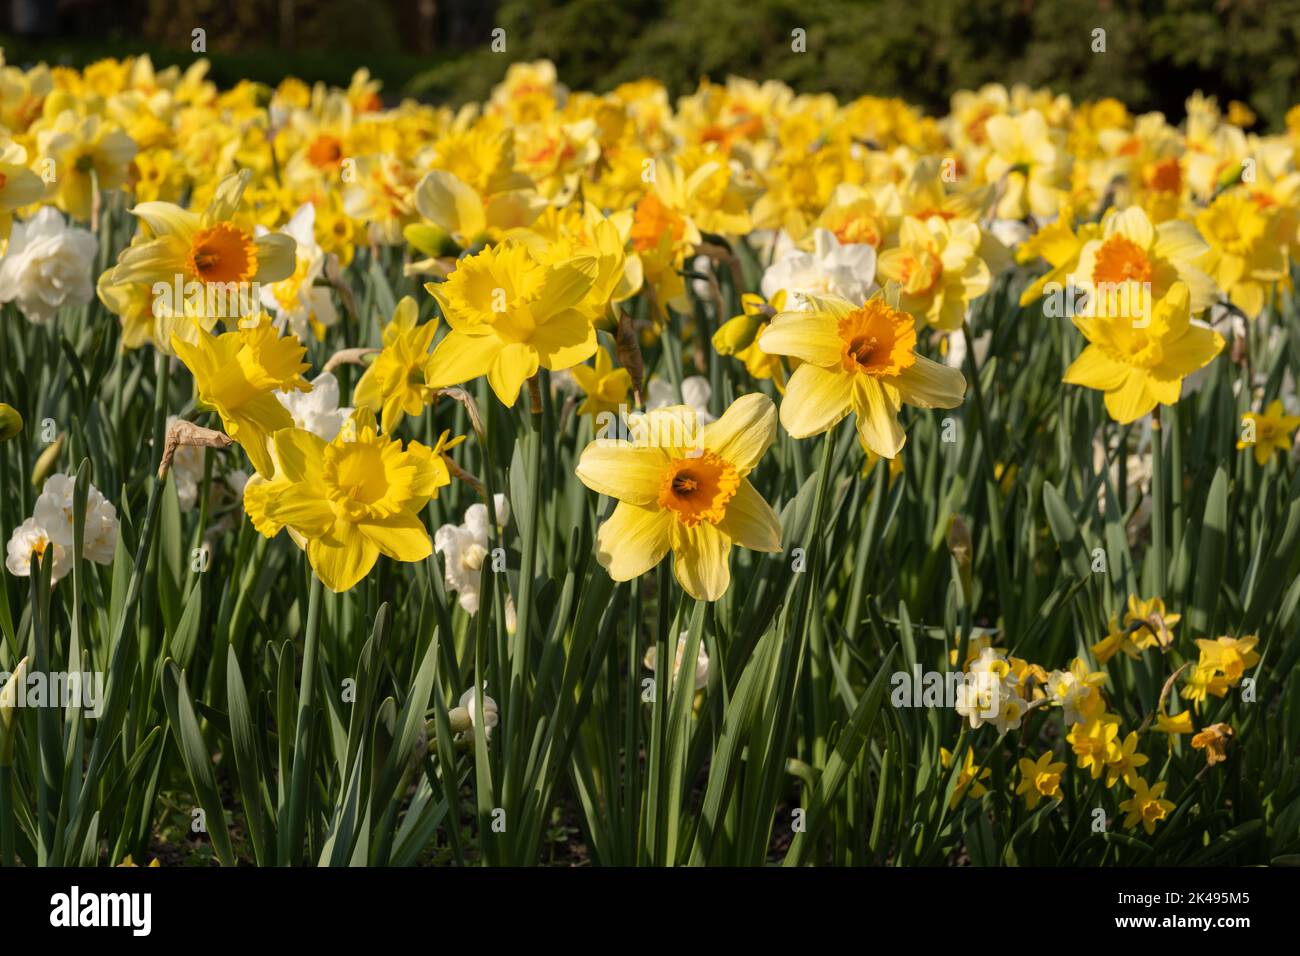 Narcissus daffodil blooming flowers in spring, flowering perennial plant of the amaryllis family Amaryllidaceae. Stock Photo